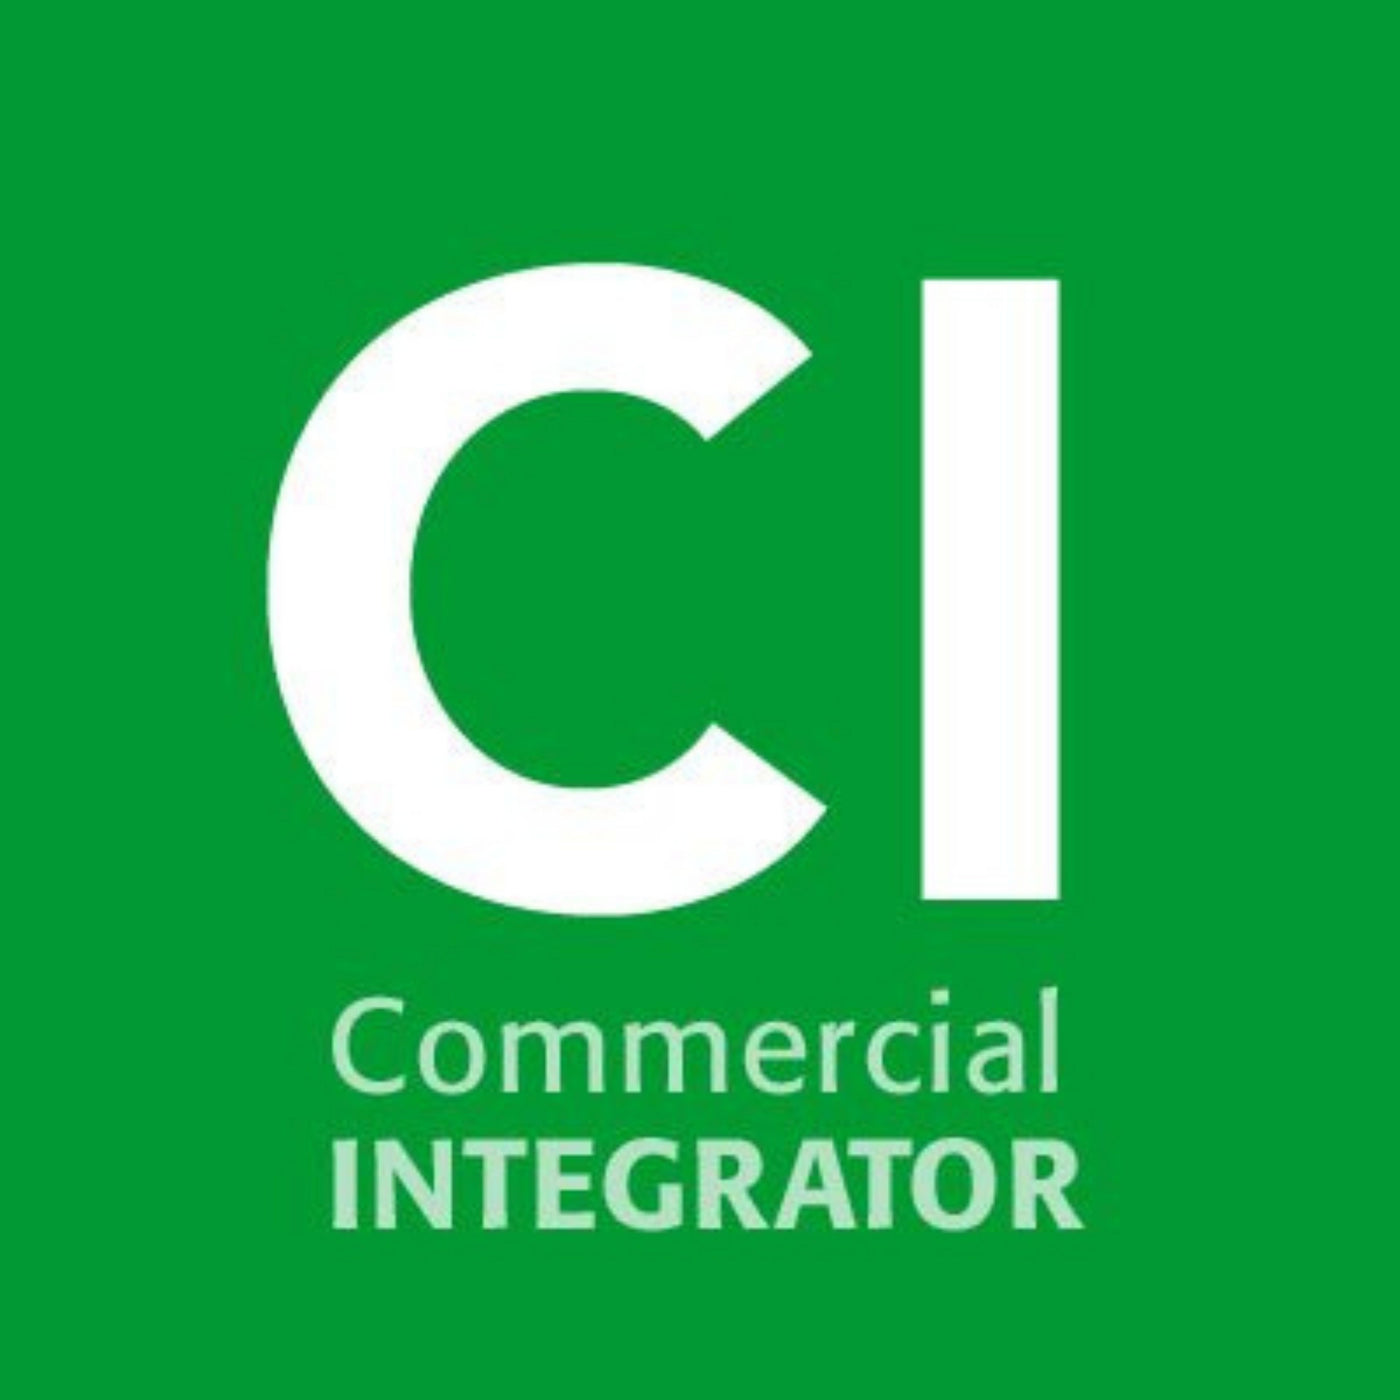 Commercial Integrator features OnSite Media